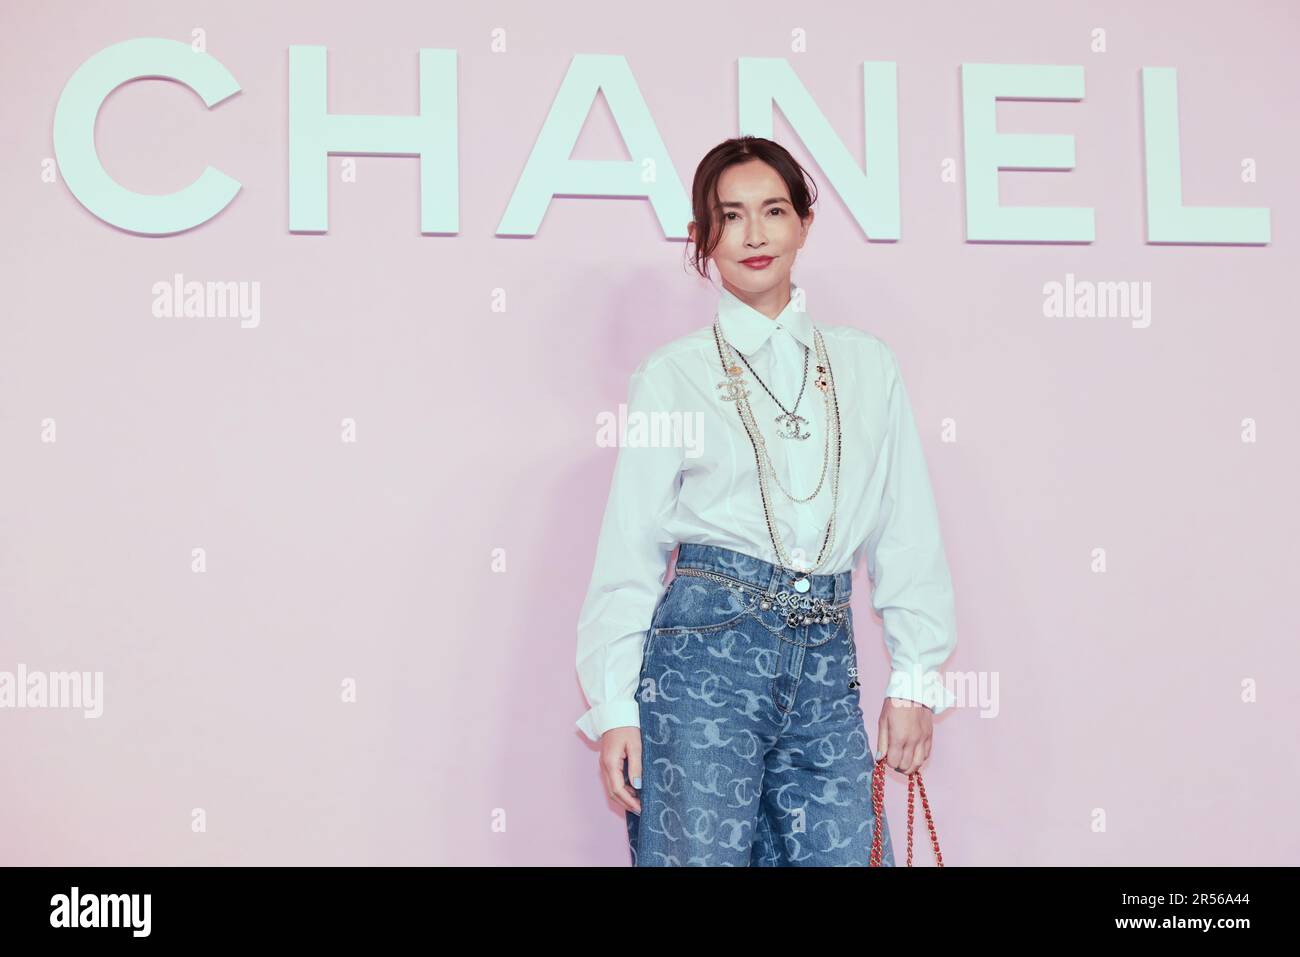 Tokyo Japan. 01/06/2023, Kyoko Hasegawa attends the photocall of the Chanel Metiers d'Art 2022/23 Replica Show at Tokyo Big Sight on June 1, 2023 in Japan. Stock Photo